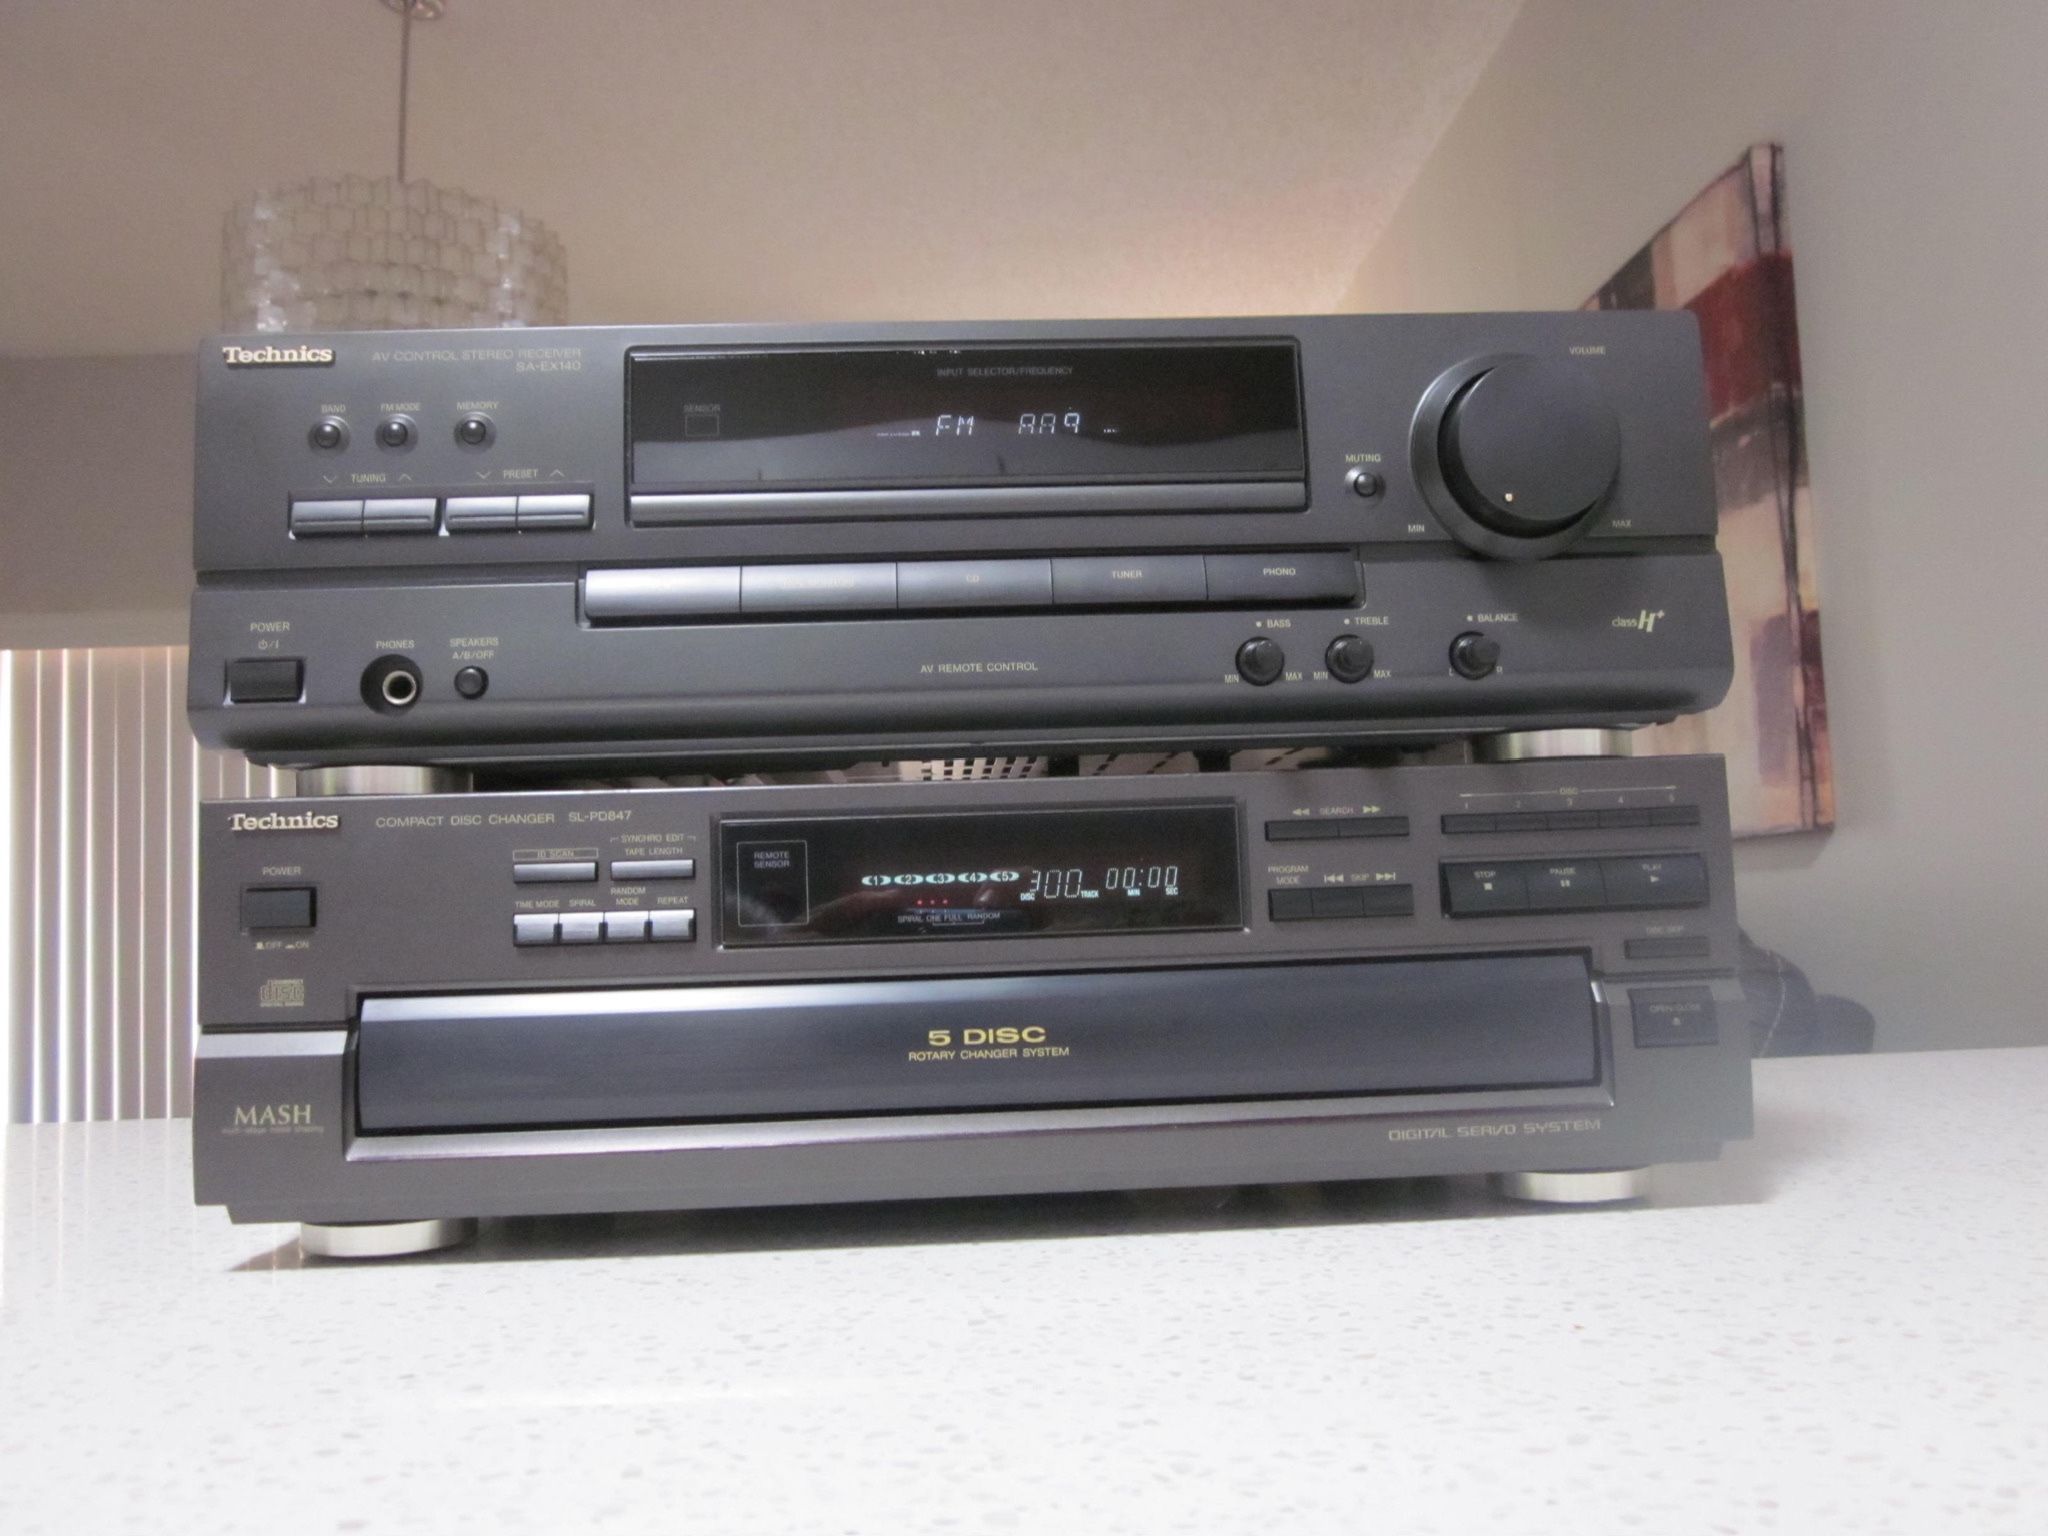 Technics High Power High Quality Stereo Receiver And 5-disc CD Player ( 2 Units And Remote ) . Great Sounding Stereo System In Like New Condition . 